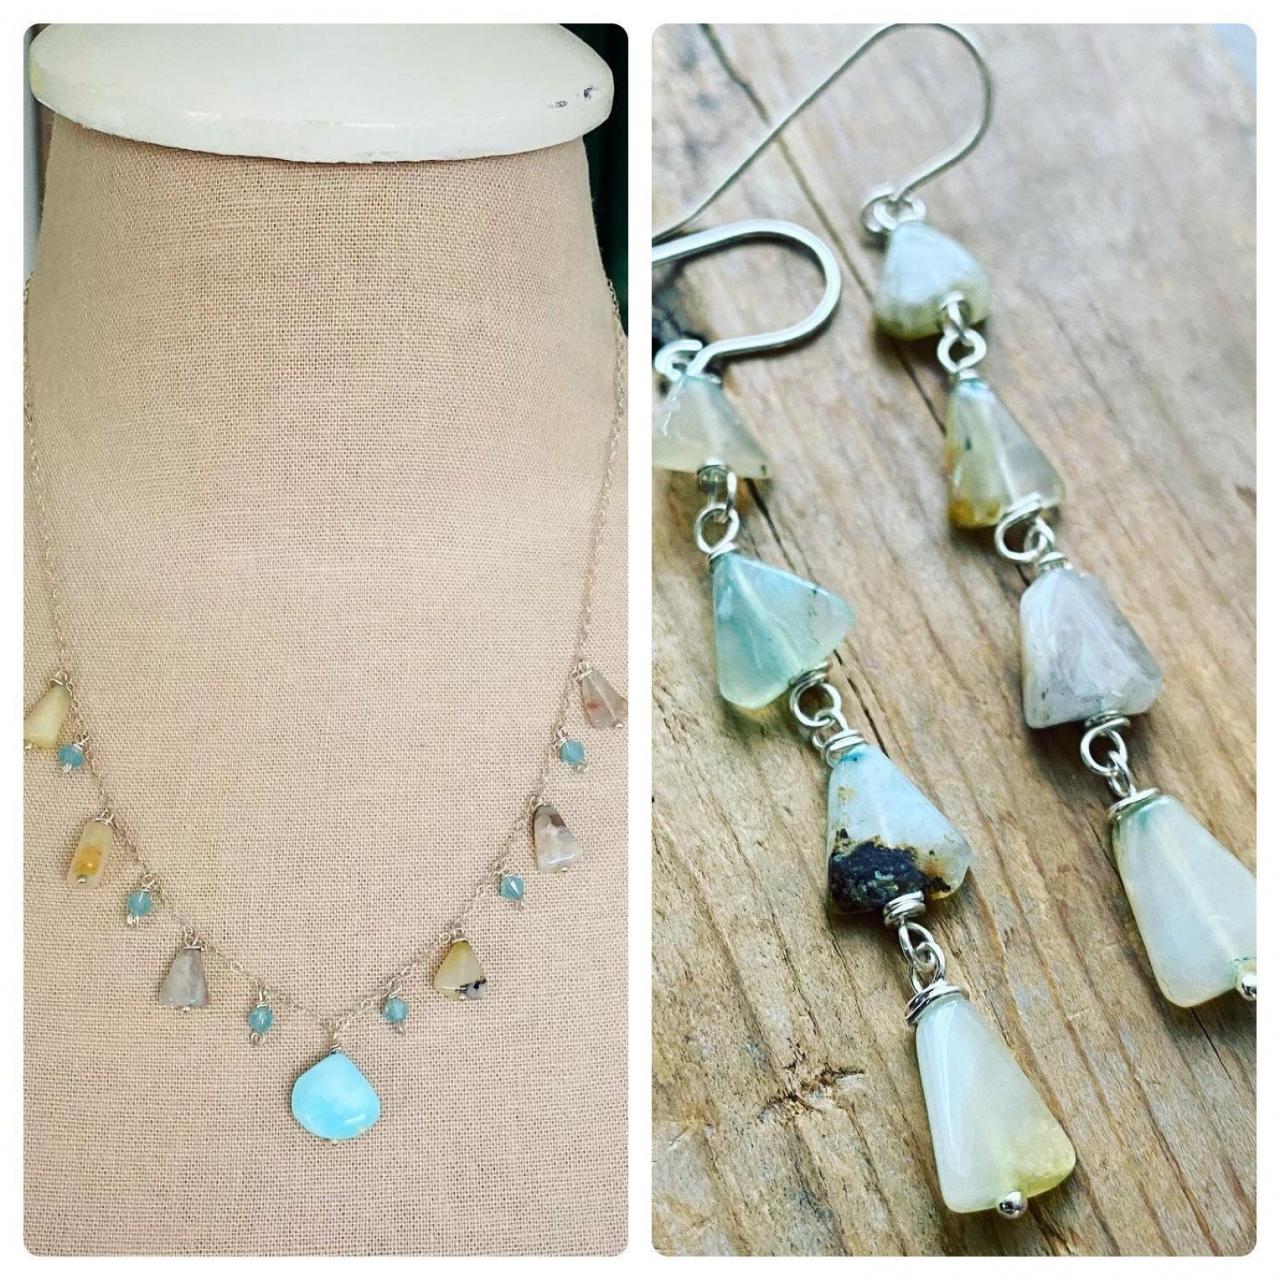 Blue Opal Necklace And Earring Set. Sterling Silver October Birthstone Ocean Blues Gemstone Jewelry Aqua Blue Tropical Natural Tones Ooak.